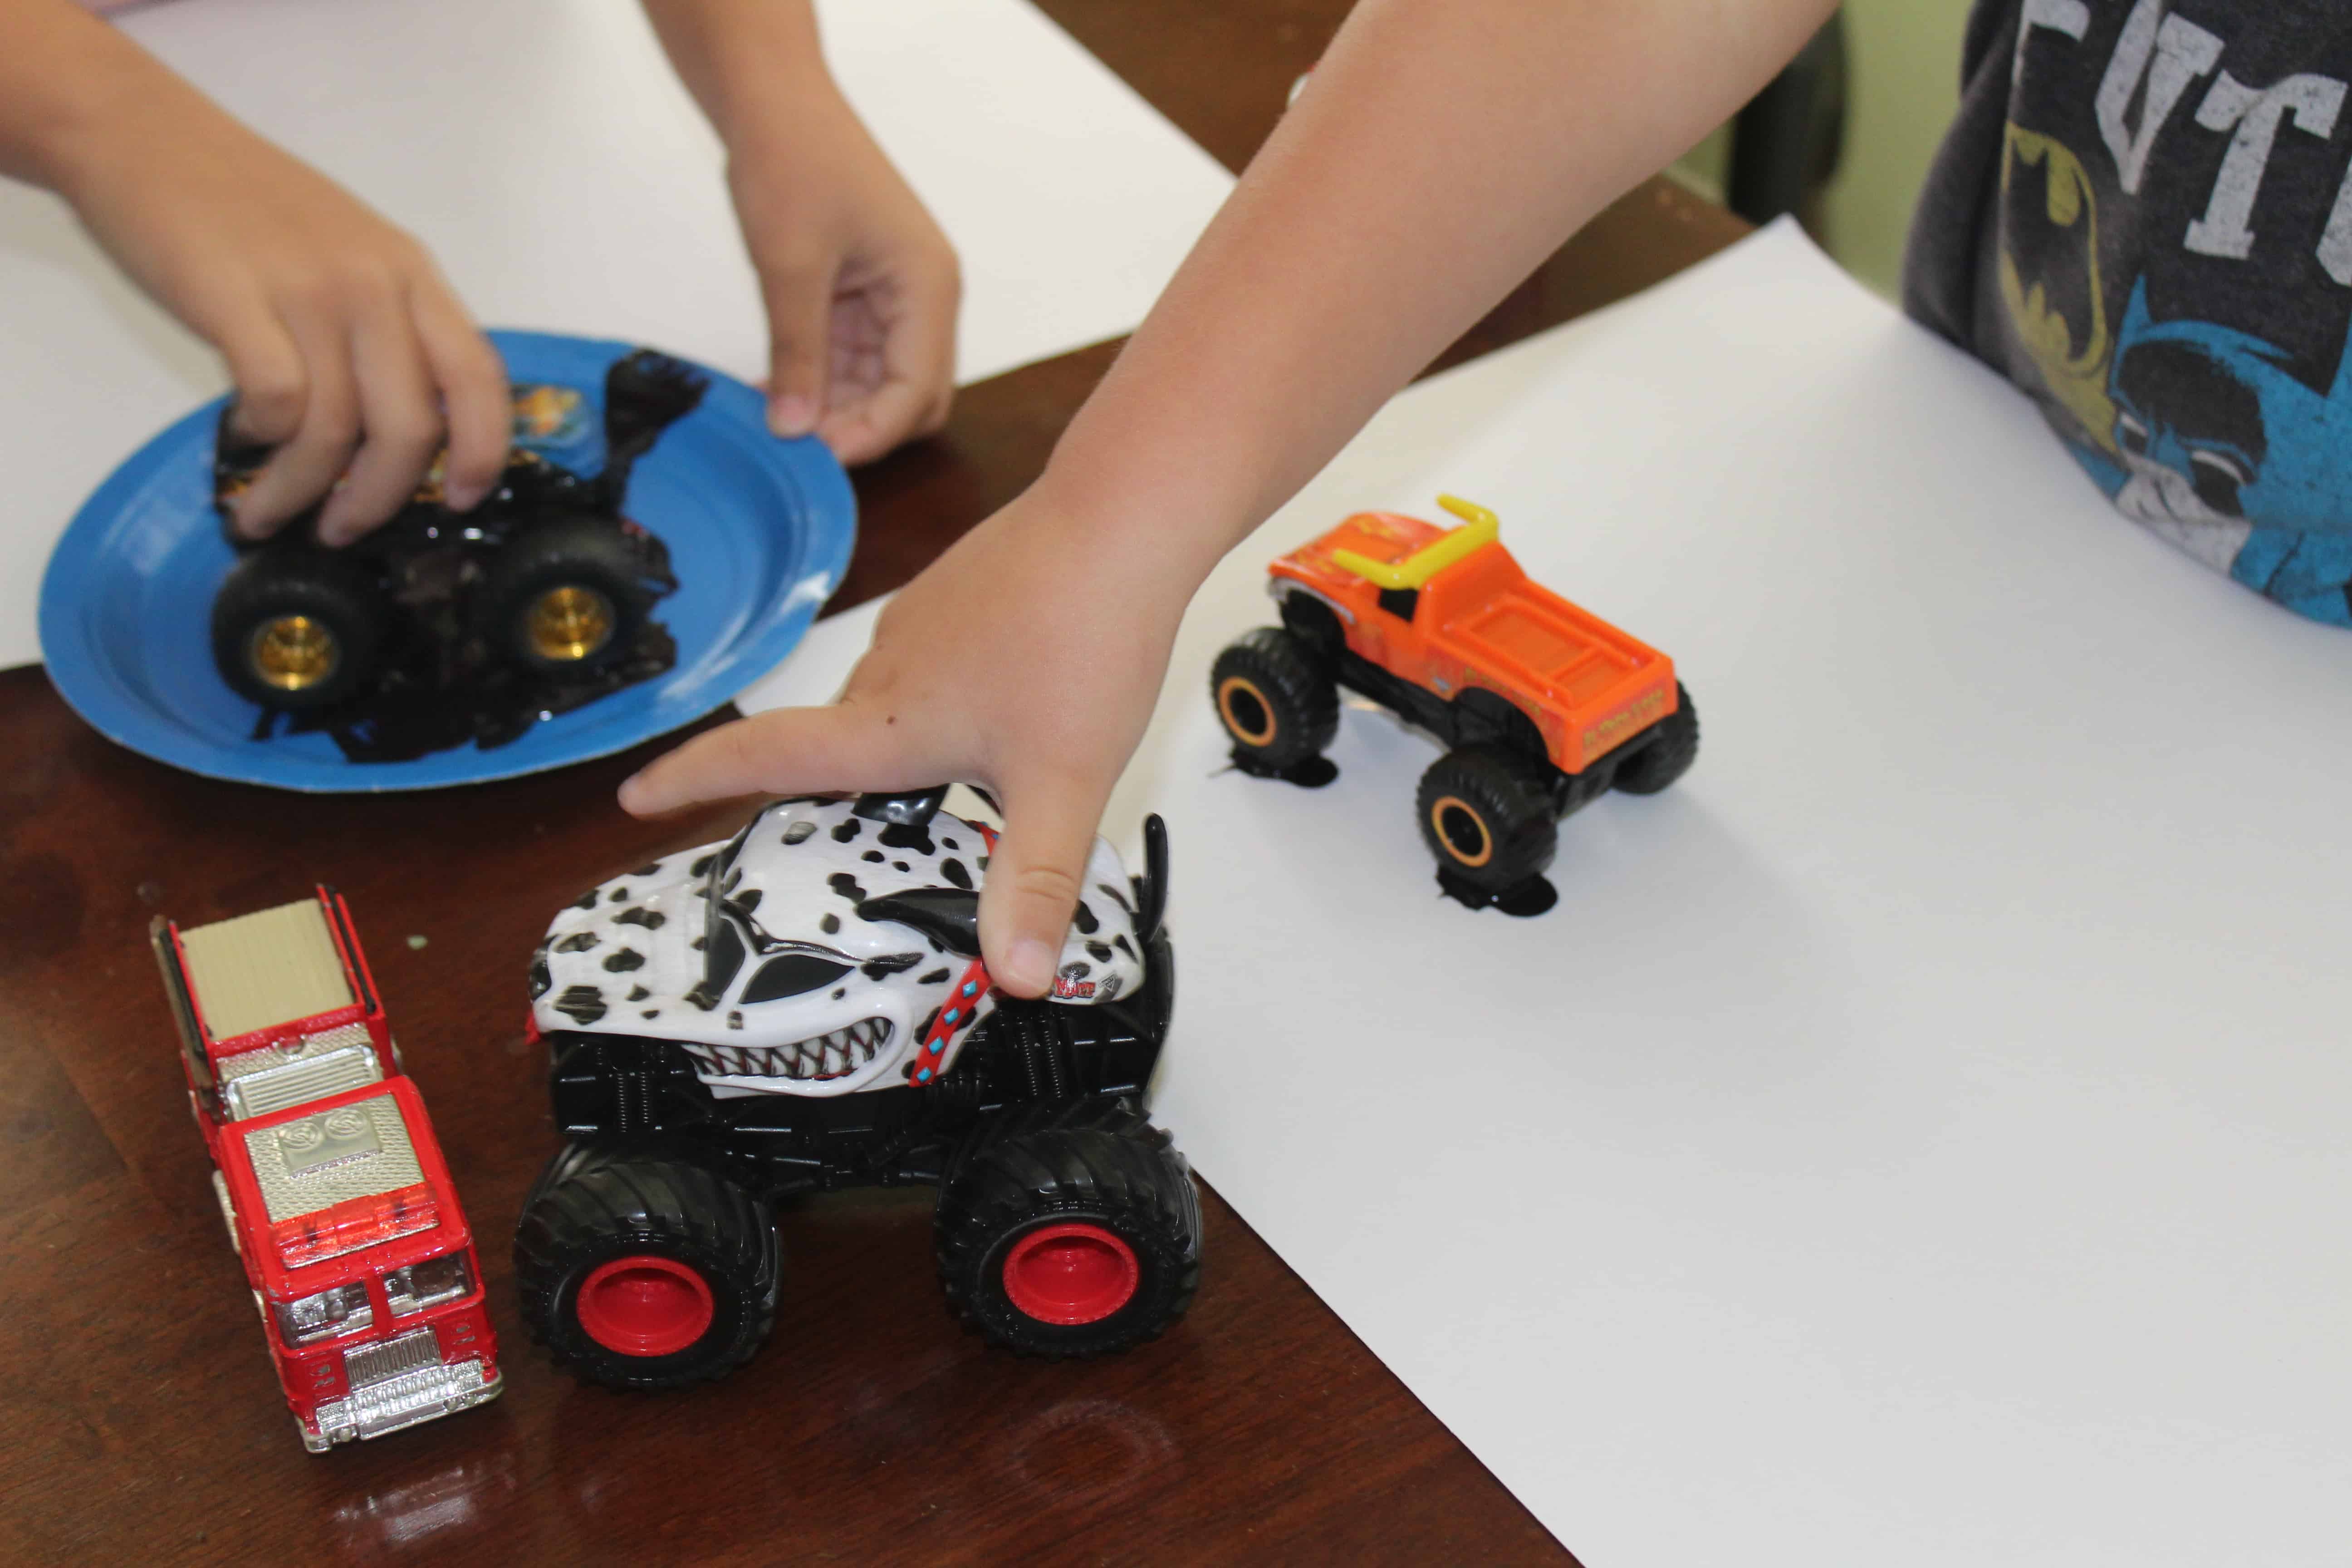 Toy trucks and a plate of "mud" with activity mats